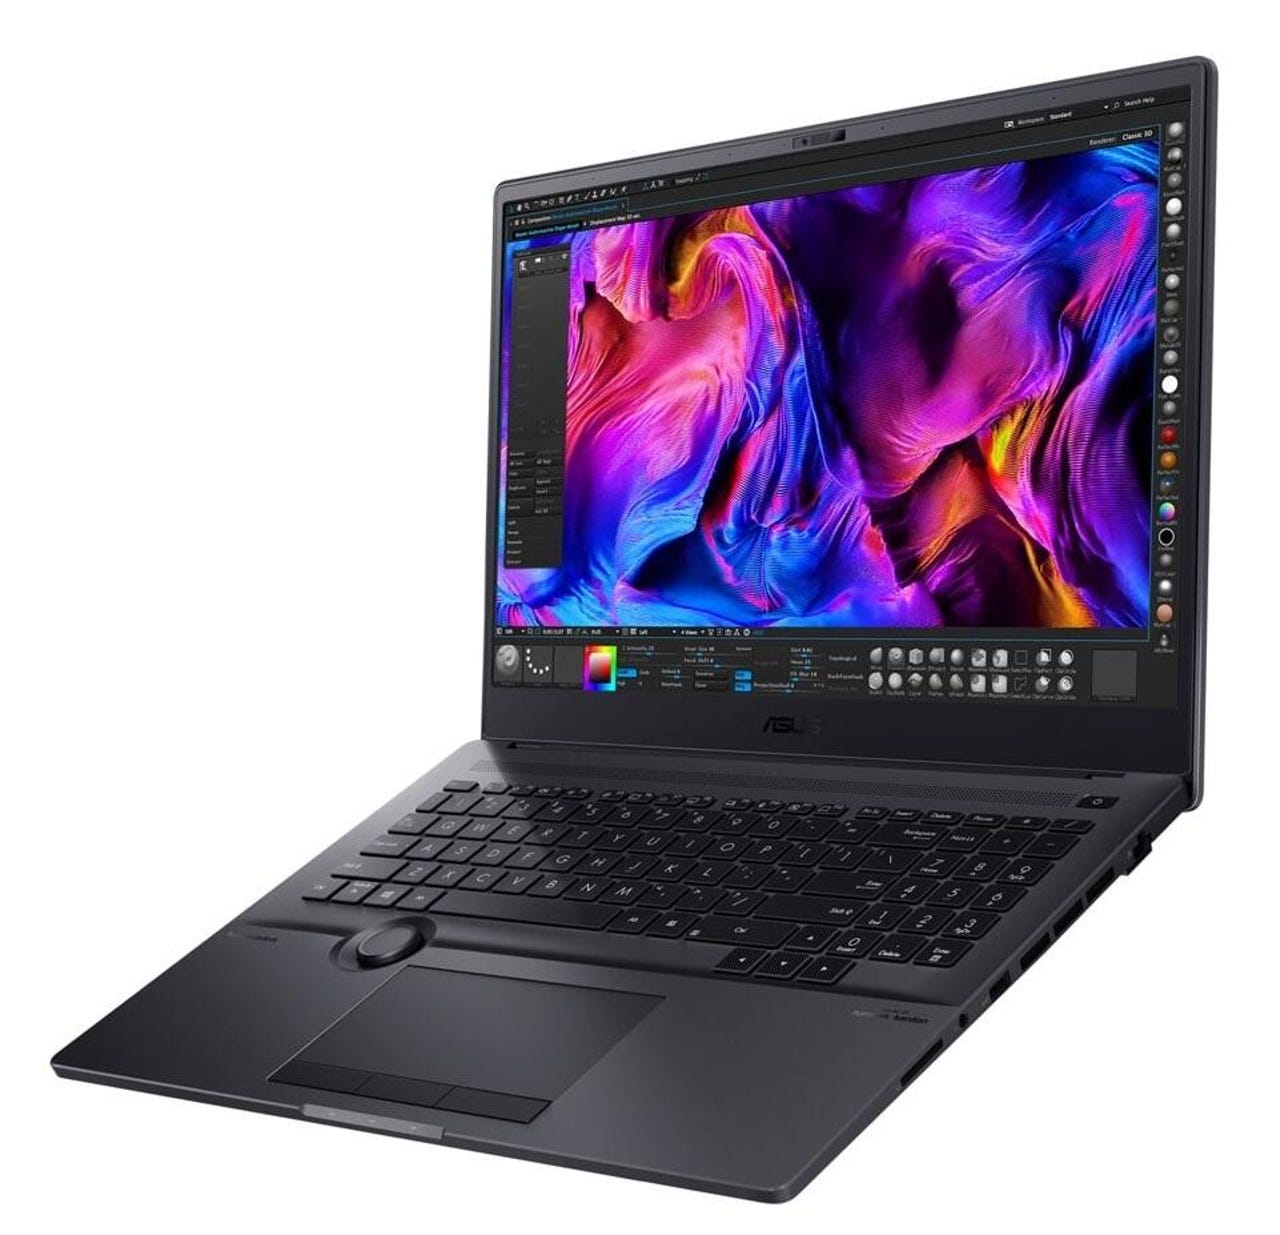 Asus unleashes torrent of new laptops with OLED displays for digital creators